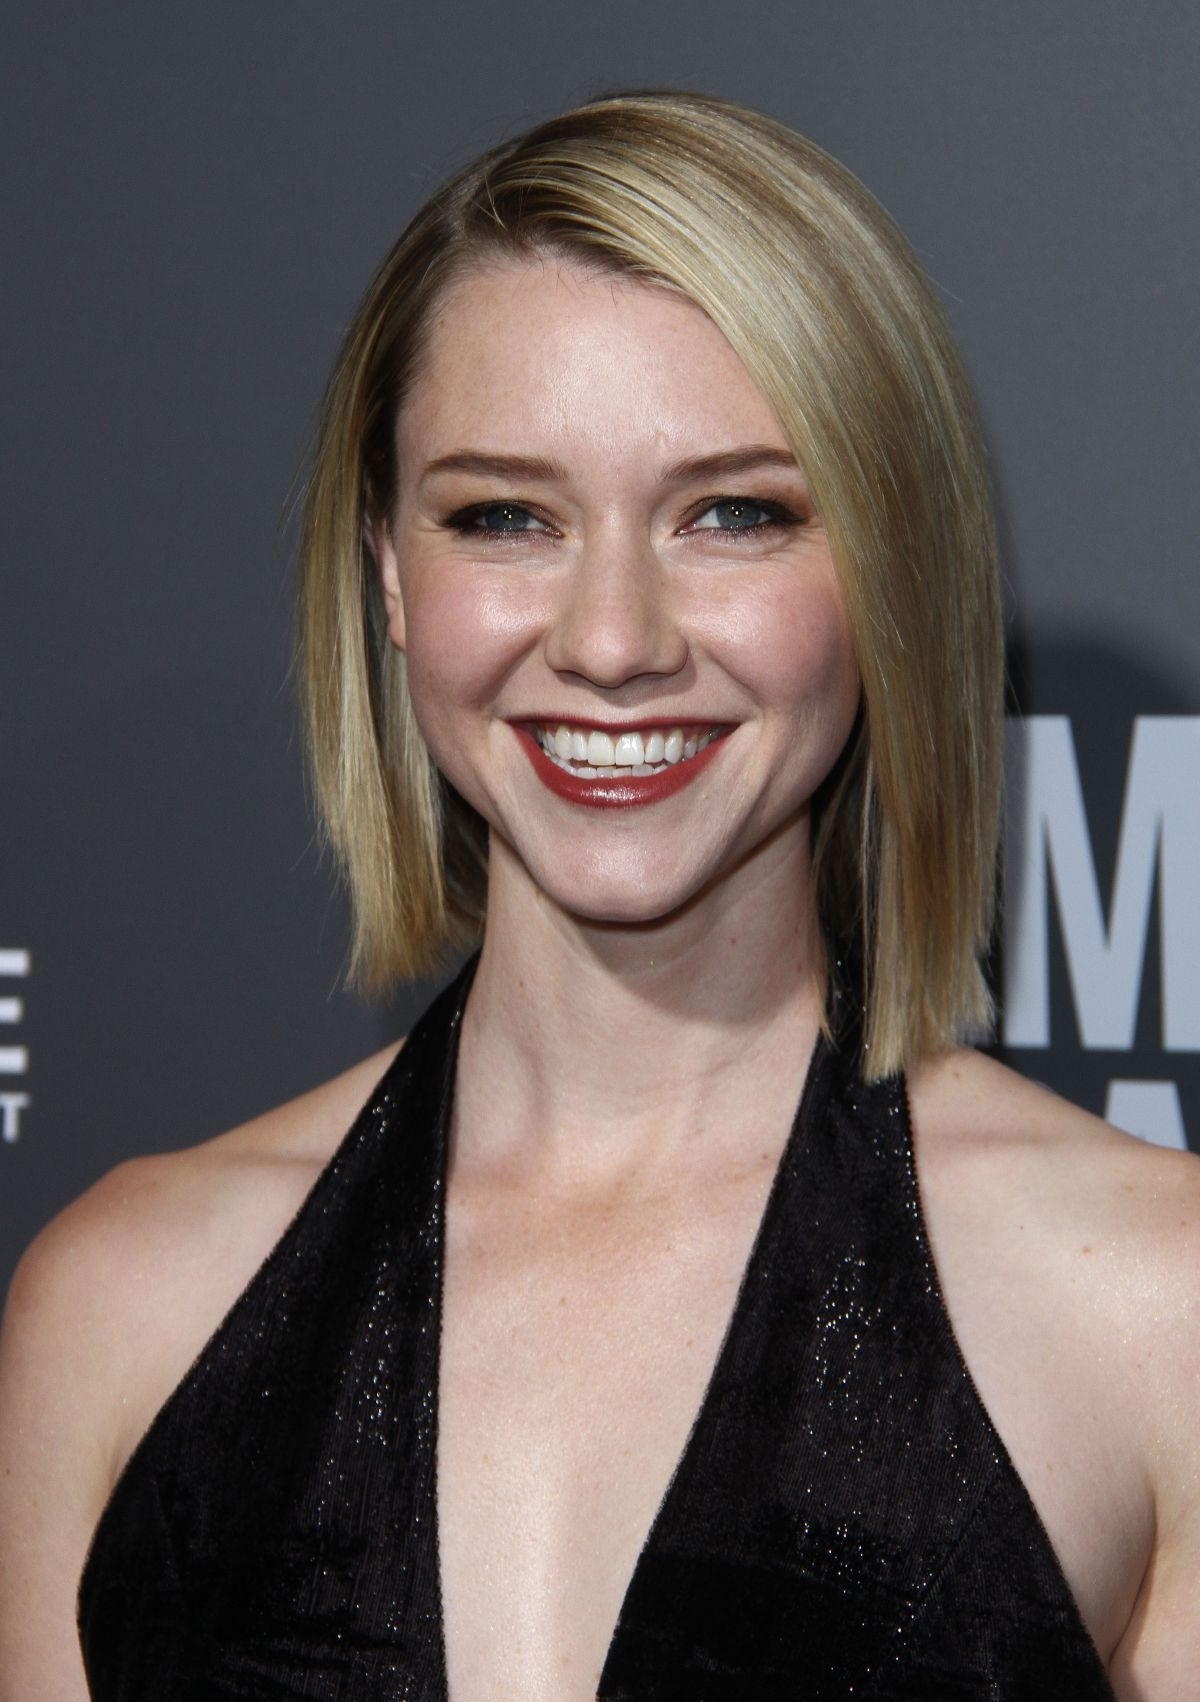 How tall is Valorie Curry?